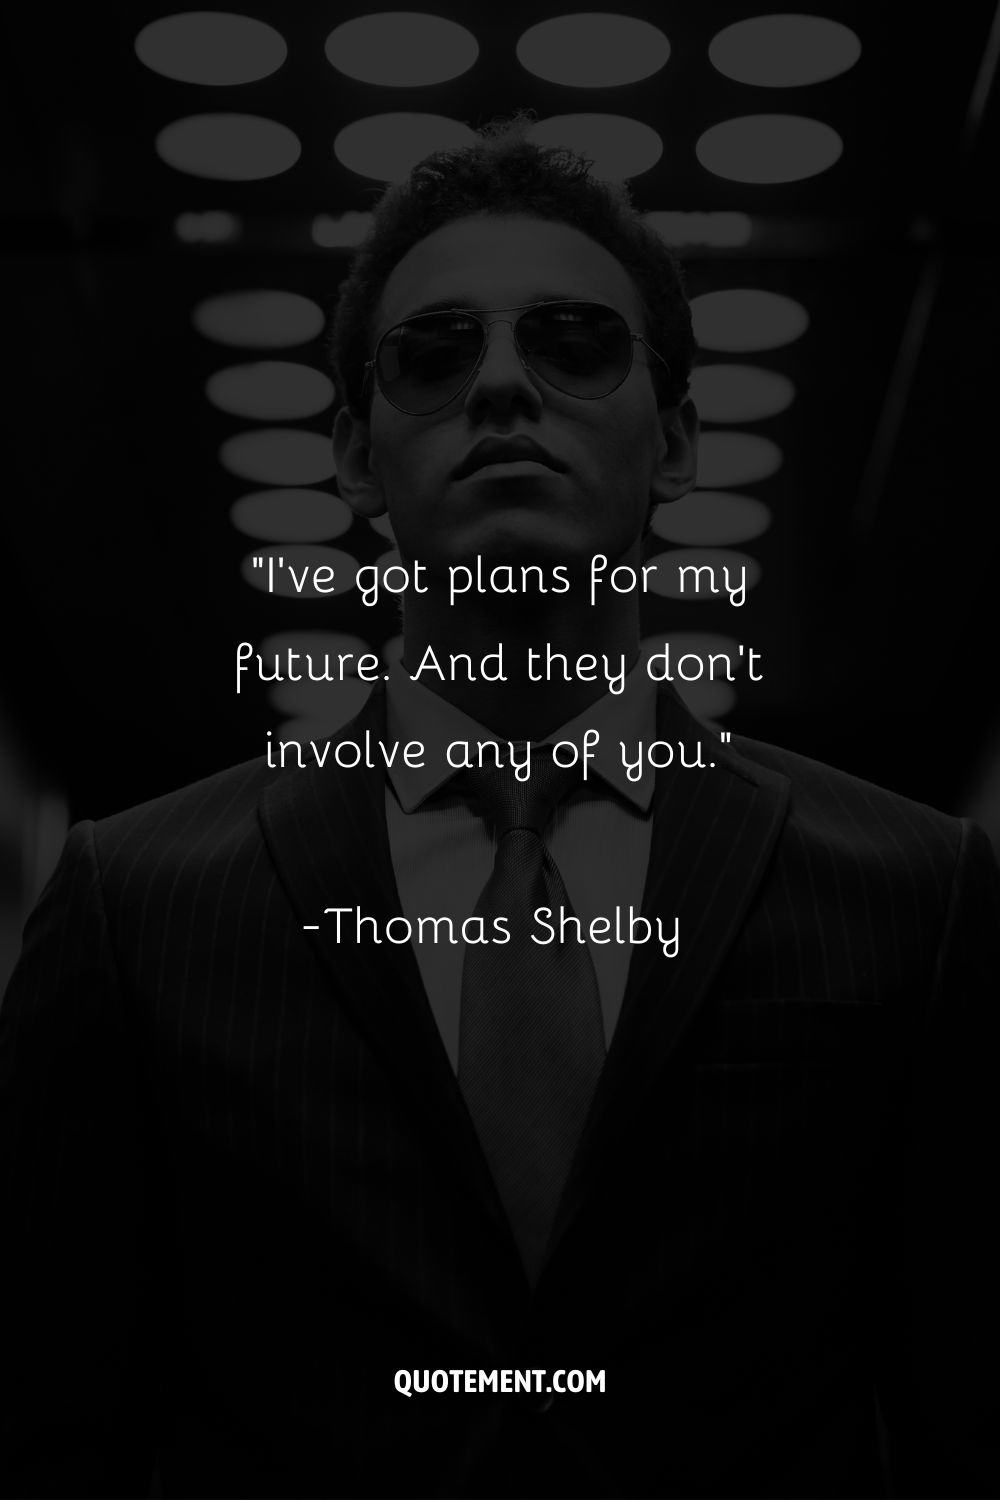 ”I’ve got plans for my future. And they don’t involve any of you.”